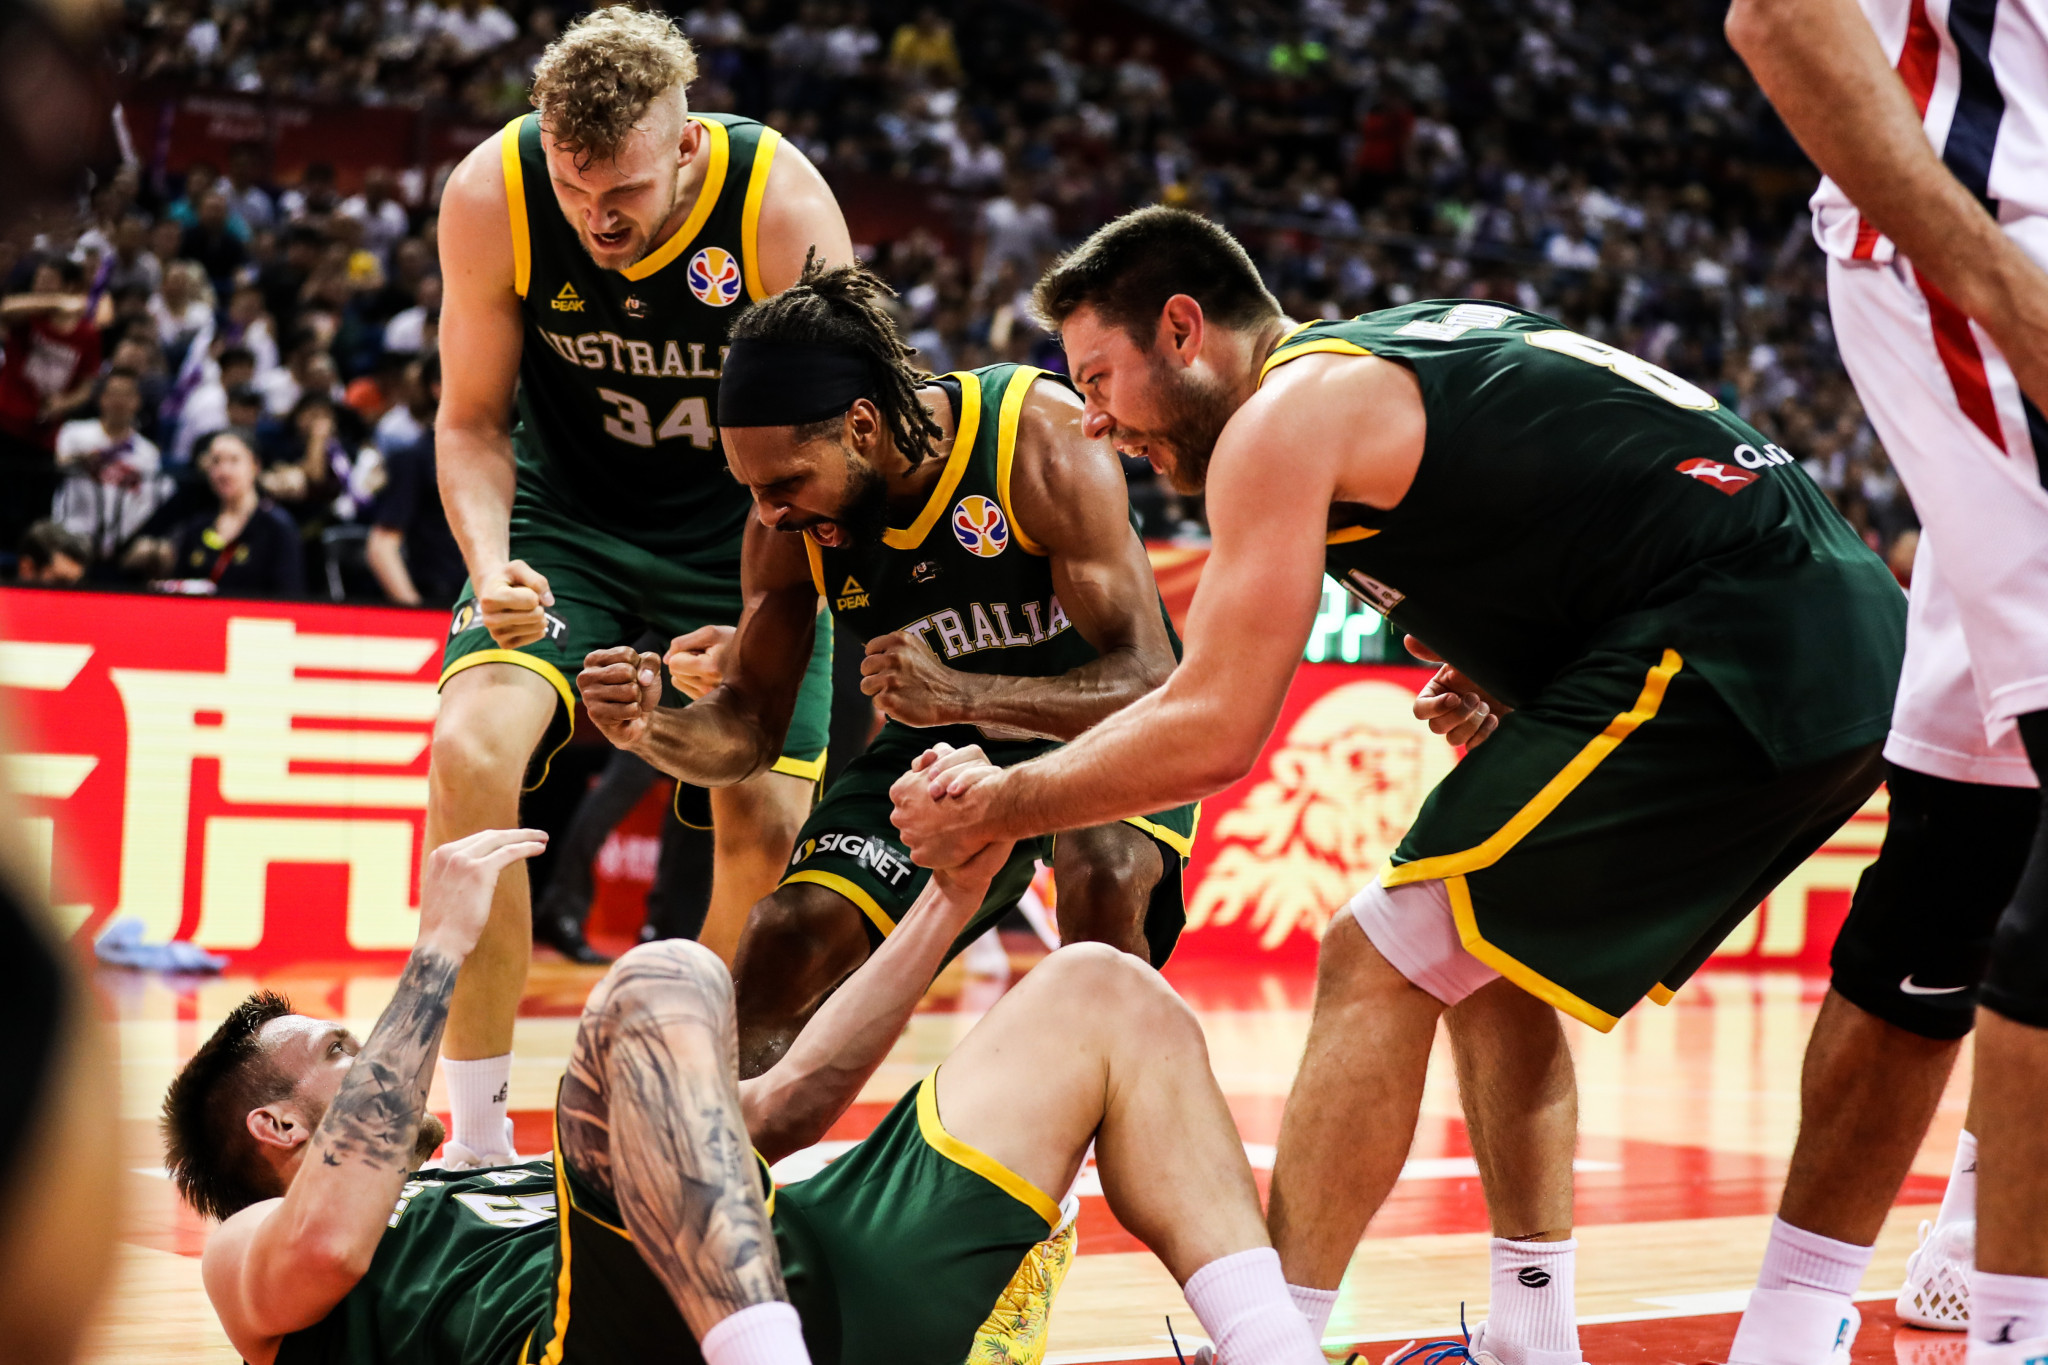 The Australian basketball squad for Tokyo 2020, which contains 10 NBA players, could prepare for the Games at a training camp in Las Vegas along with the United States and Spain if USA Basketball proposals come to fruition ©Getty Images